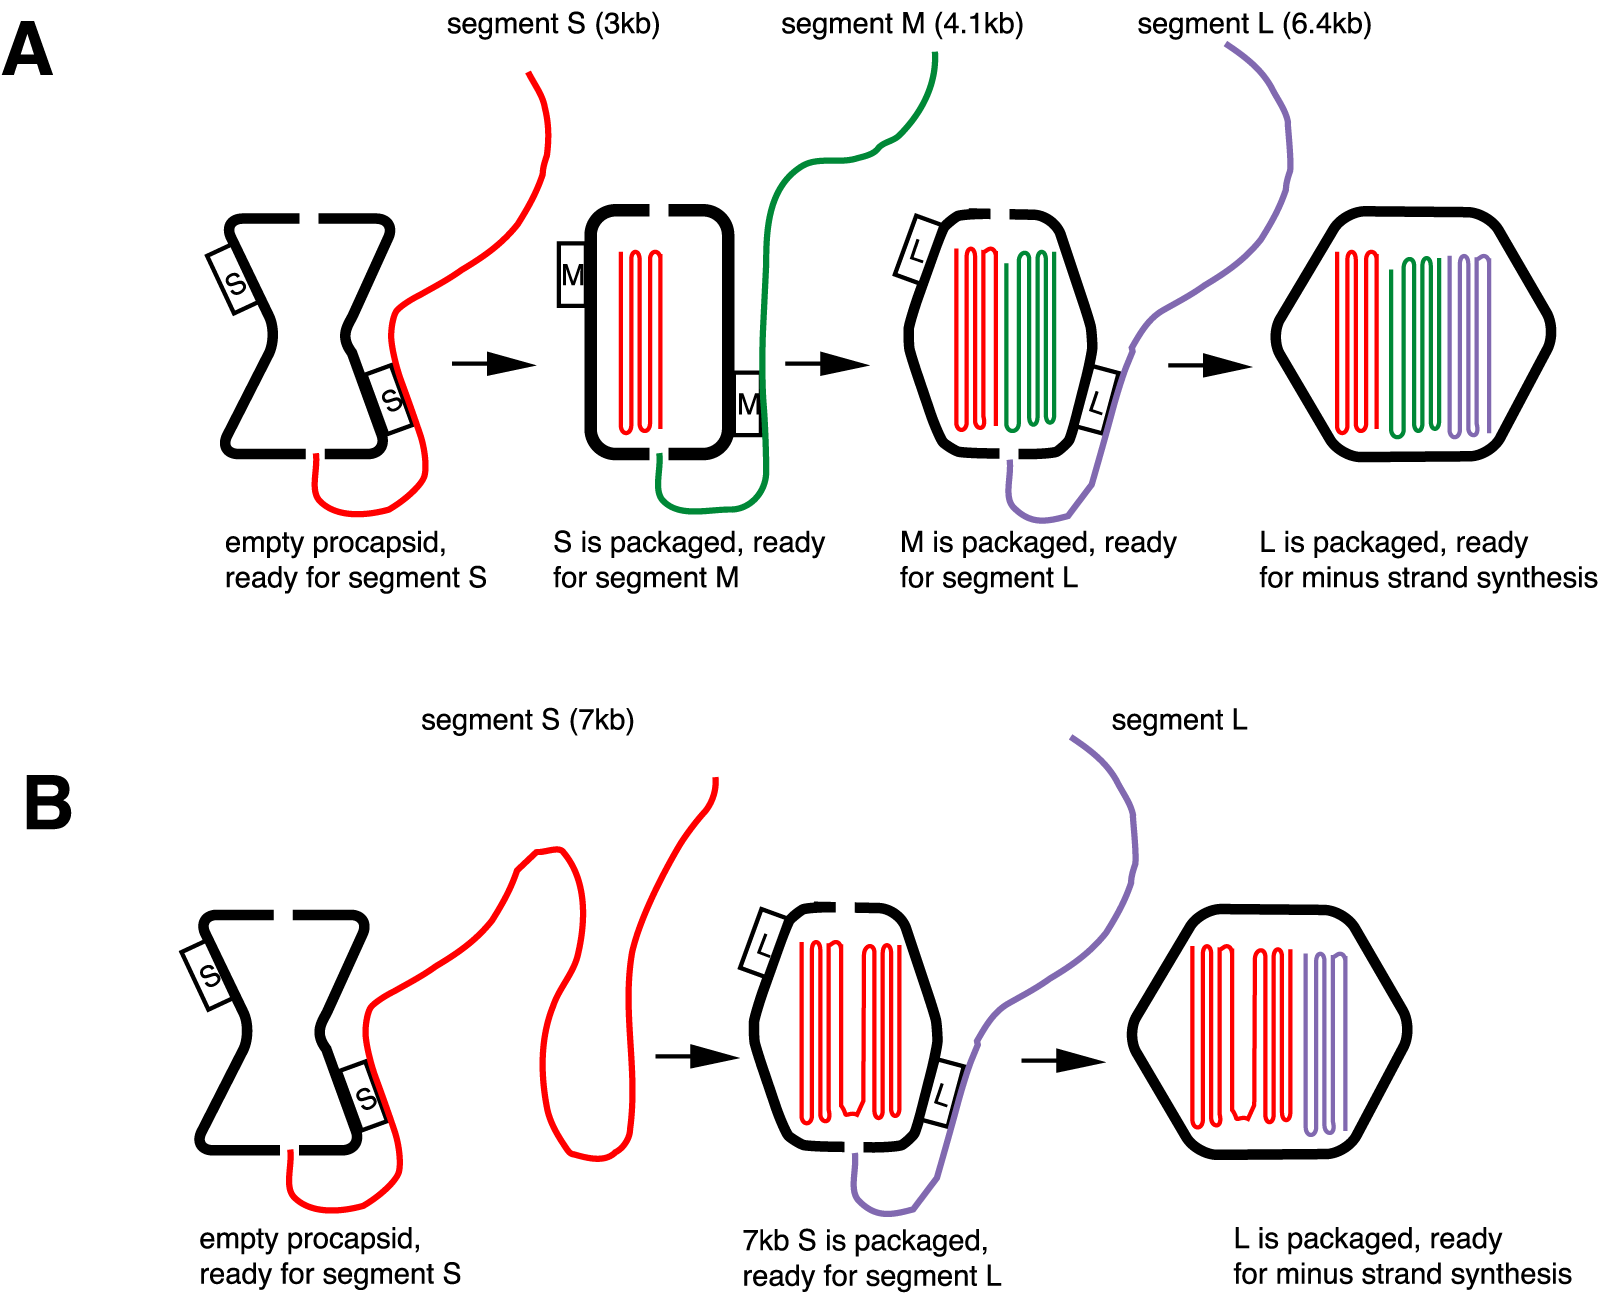 Figure 16-6: (A)  The packaging model.  The empty procapsid shows only binding sites for s.  After a full size s is packaged, the s sites disappear and m sites appear.  After a full size m is packaged, the m sites disappear and l sites appear.  After a full size l is packaged, minus strand synthesis commences.  After minus strand synthesis is completed, plus strand synthesis commences.  (B)  If segment s is of the size equal to the sum of both s and m, the s sites will disappear and the l sites will appear and segment l will be packaged without segment m.